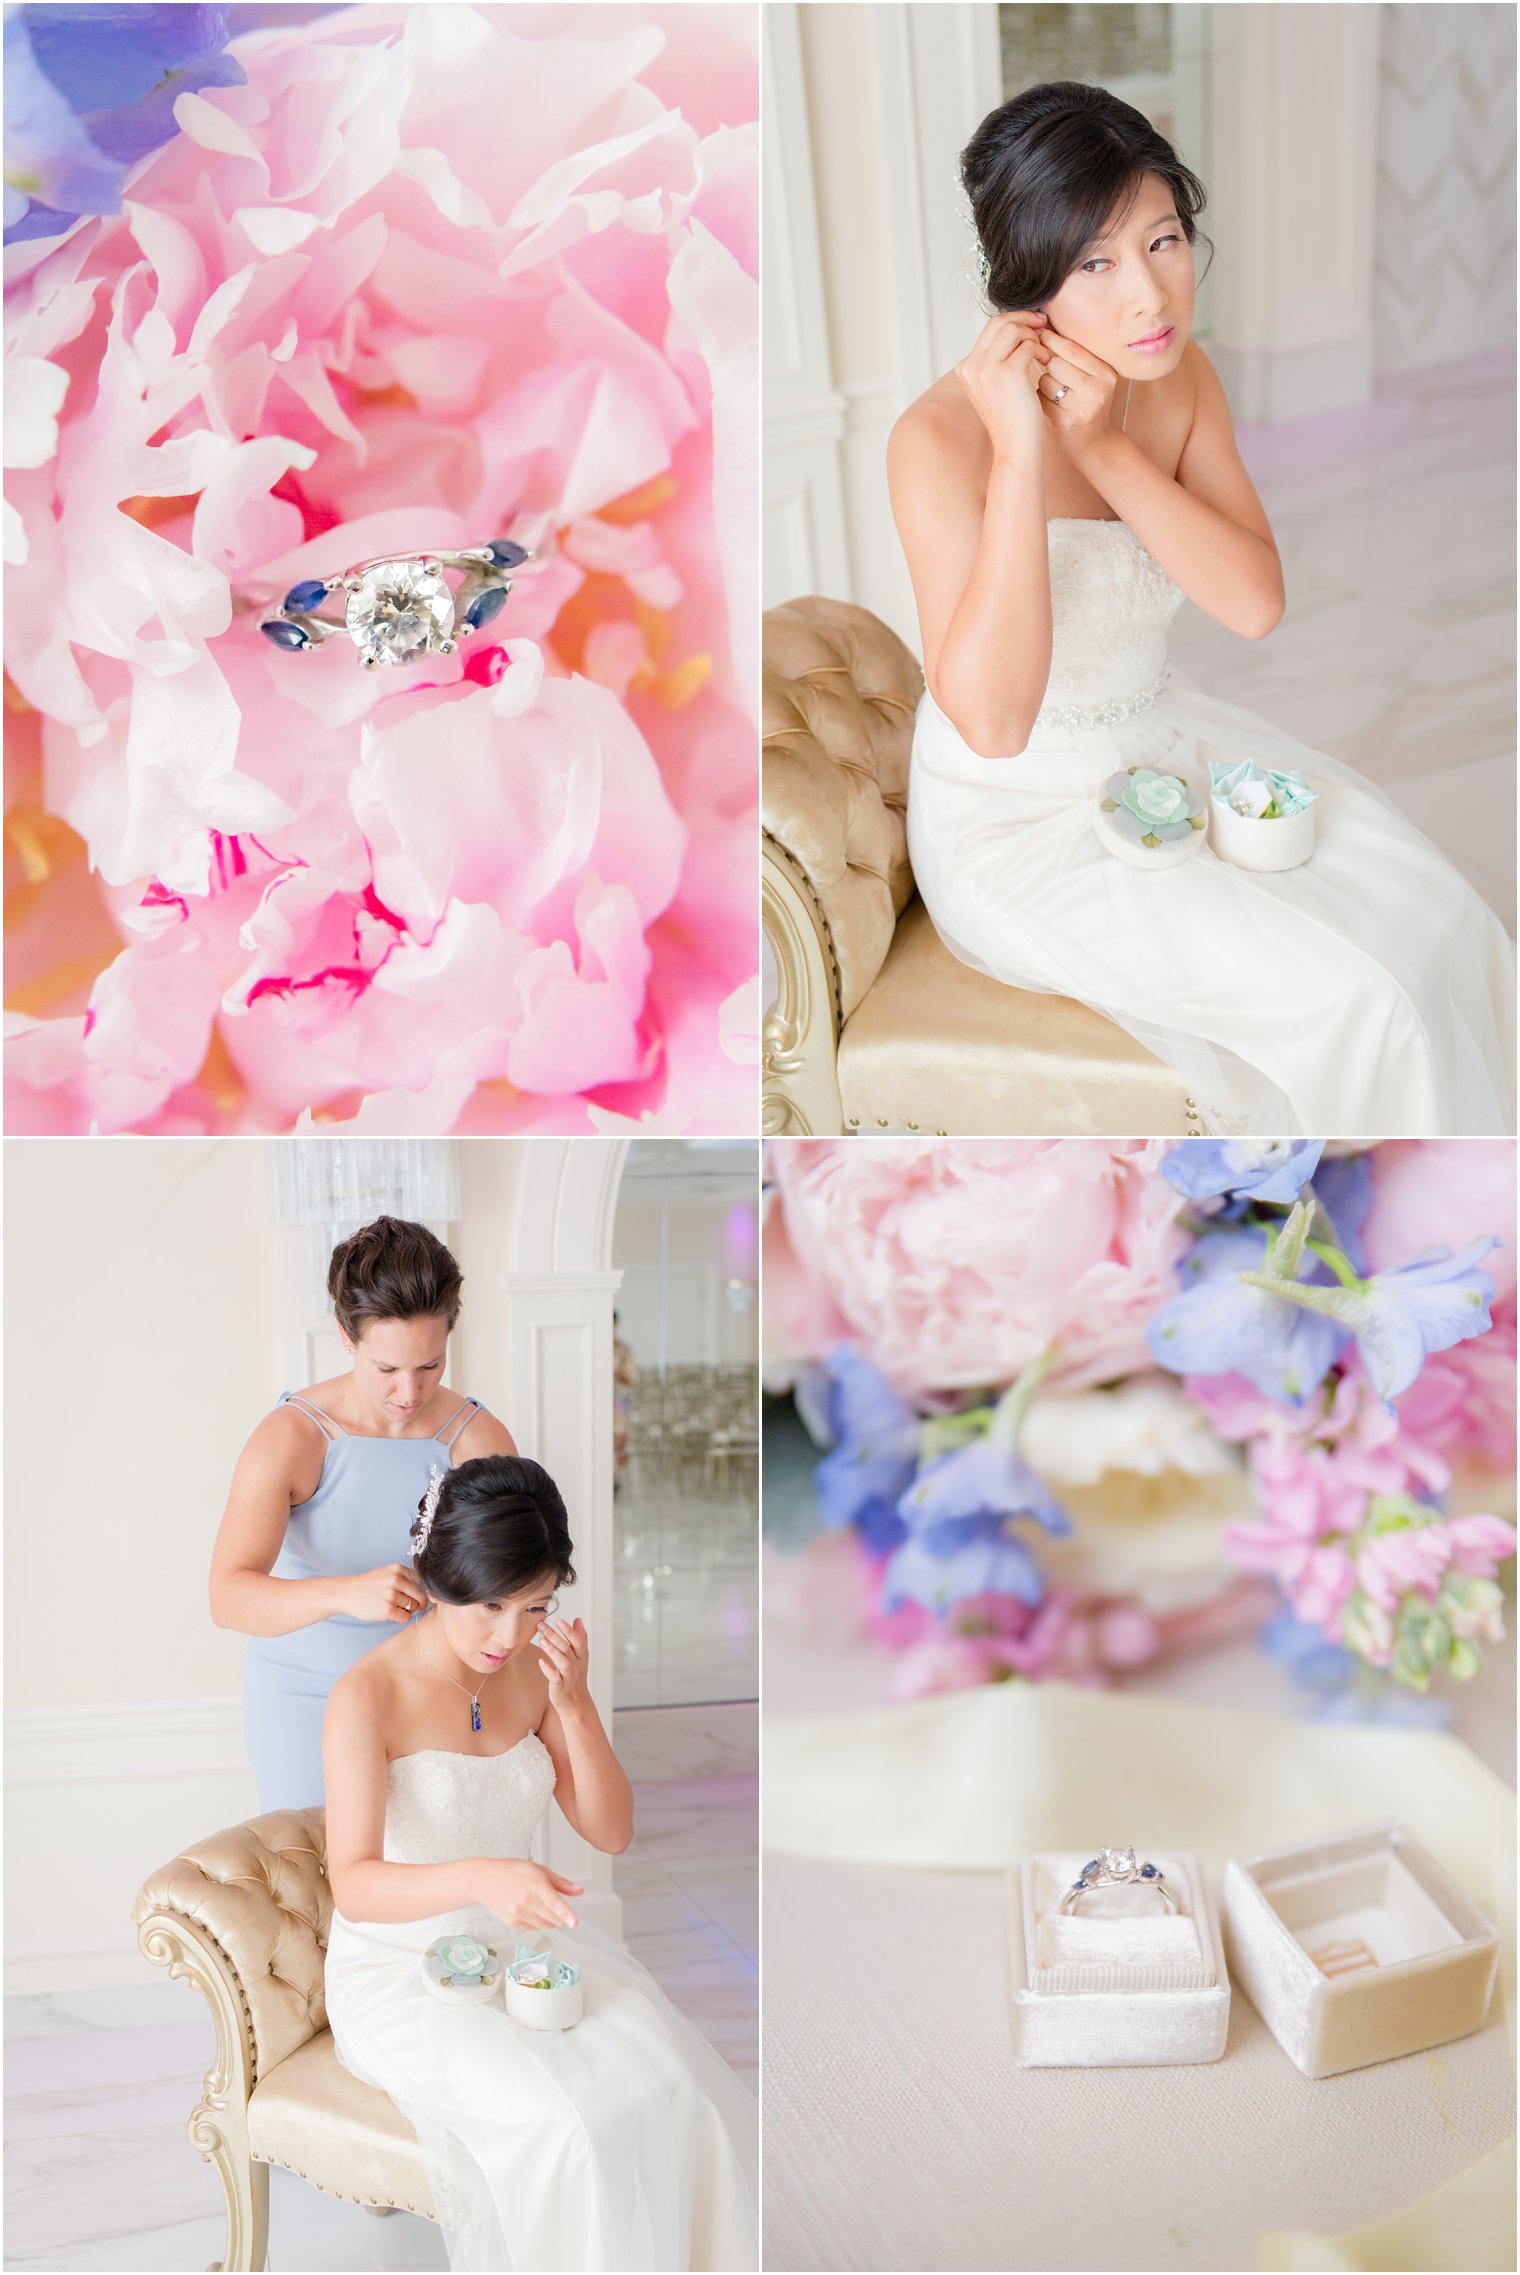 Diamond ring on pink florals while bride gets ready for wedding day at The Bethwood